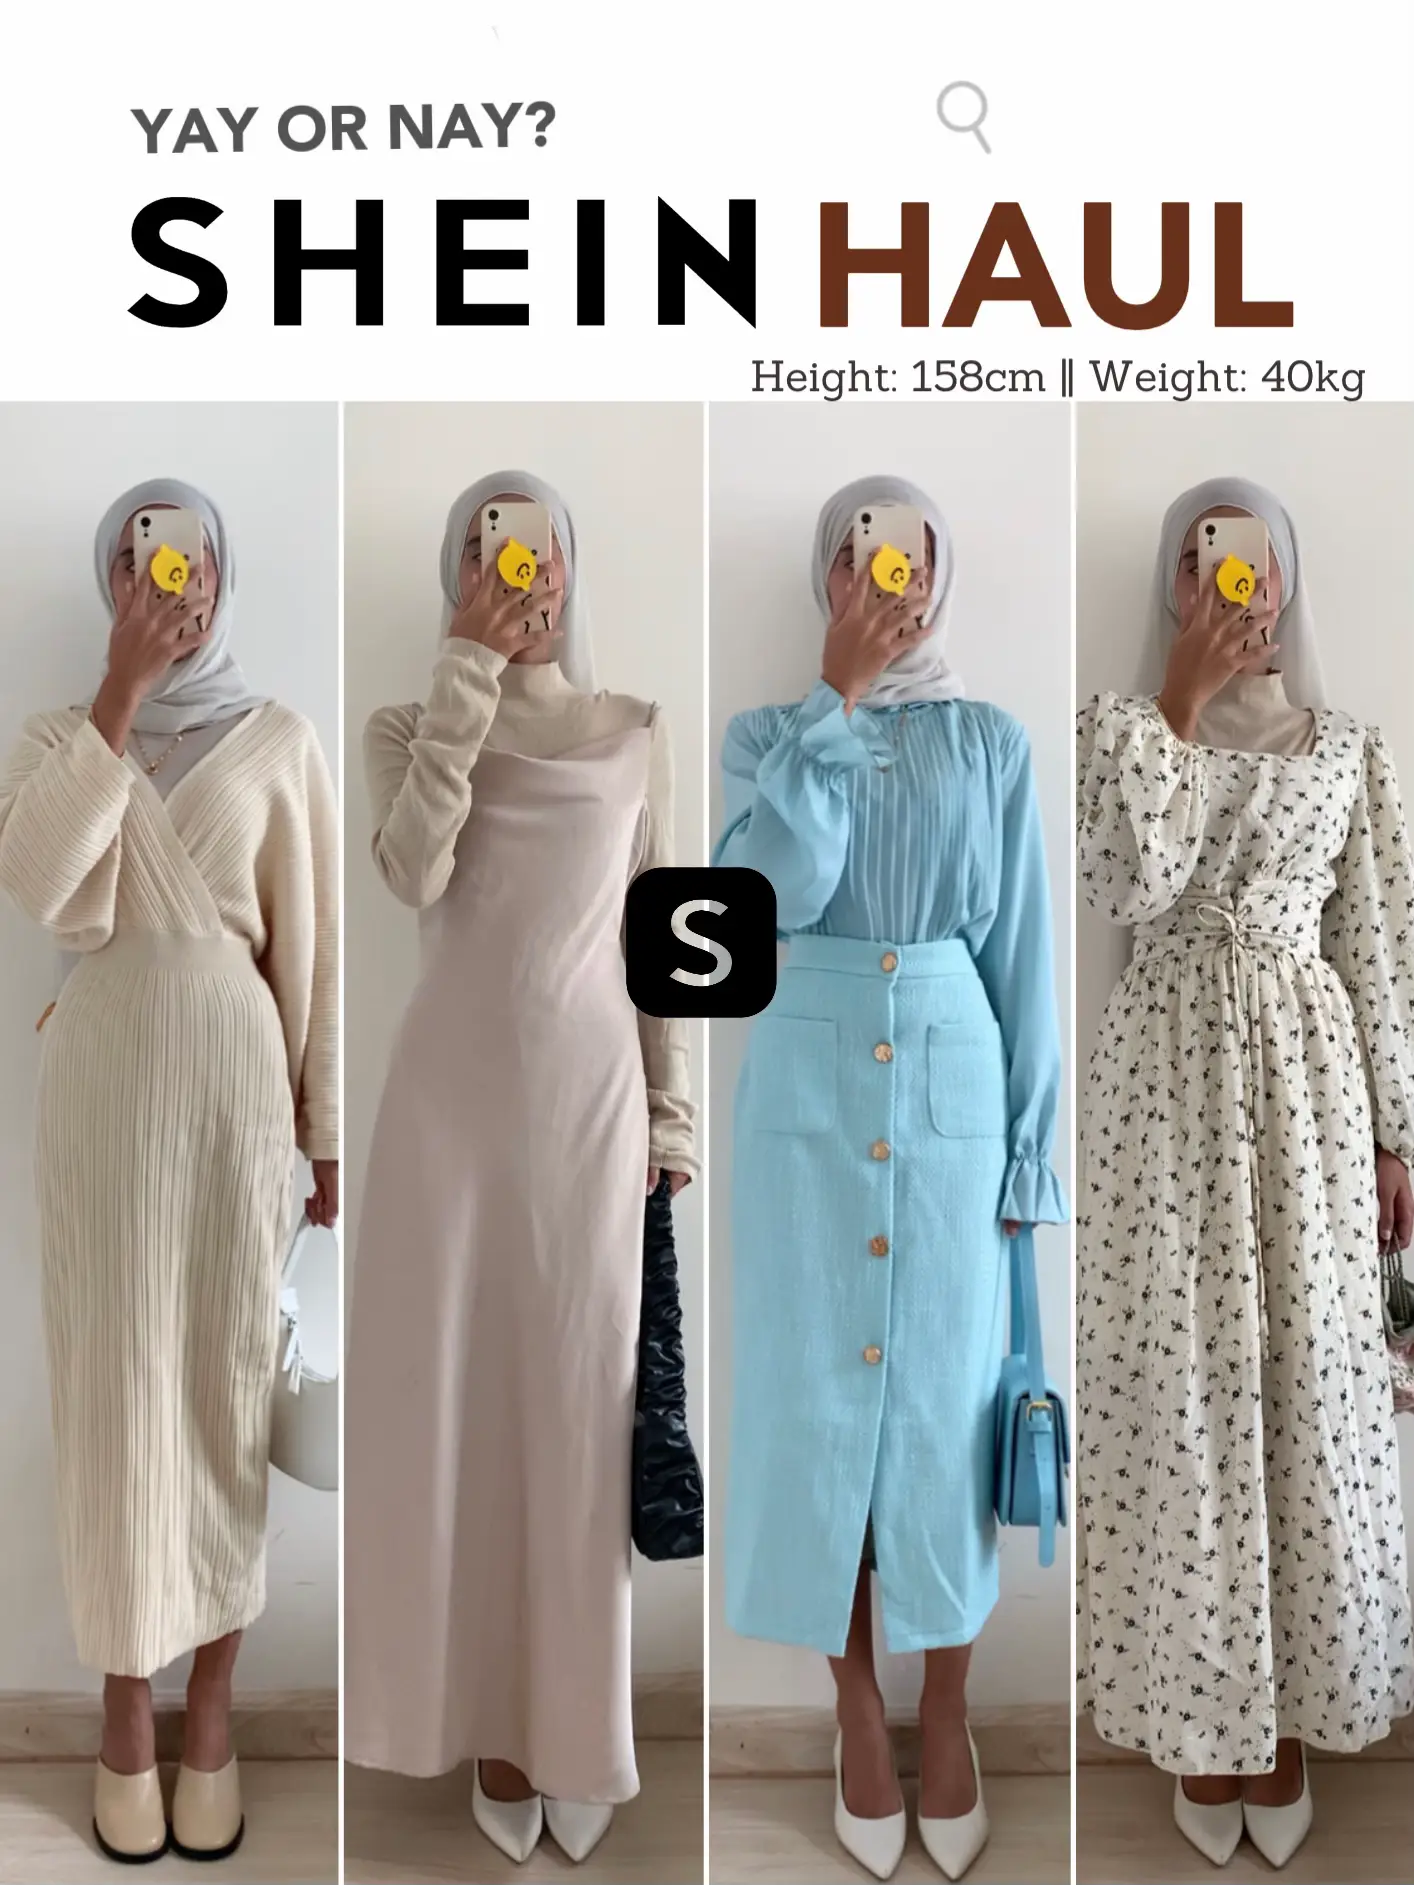 Shein clothing haul, was it worth it? An honest review 